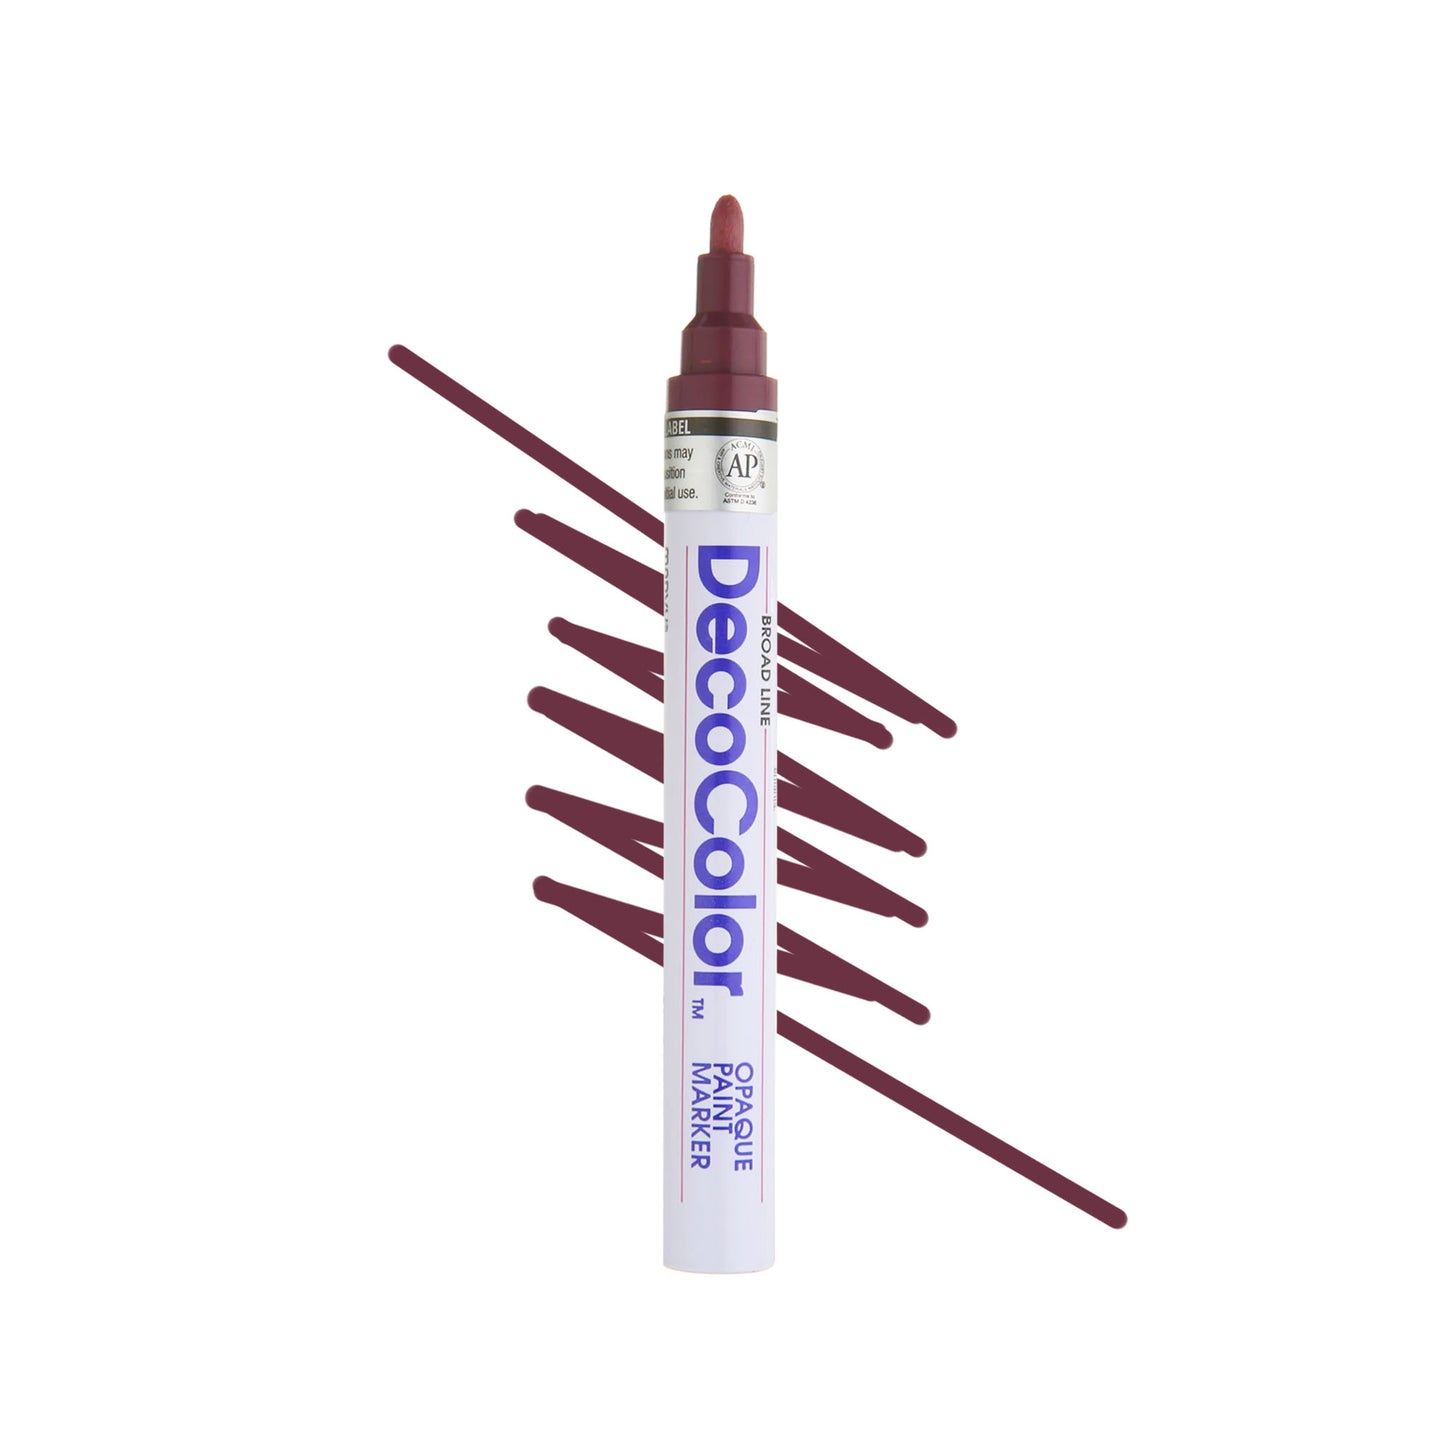 Deco Color artist paint markers in plum red.